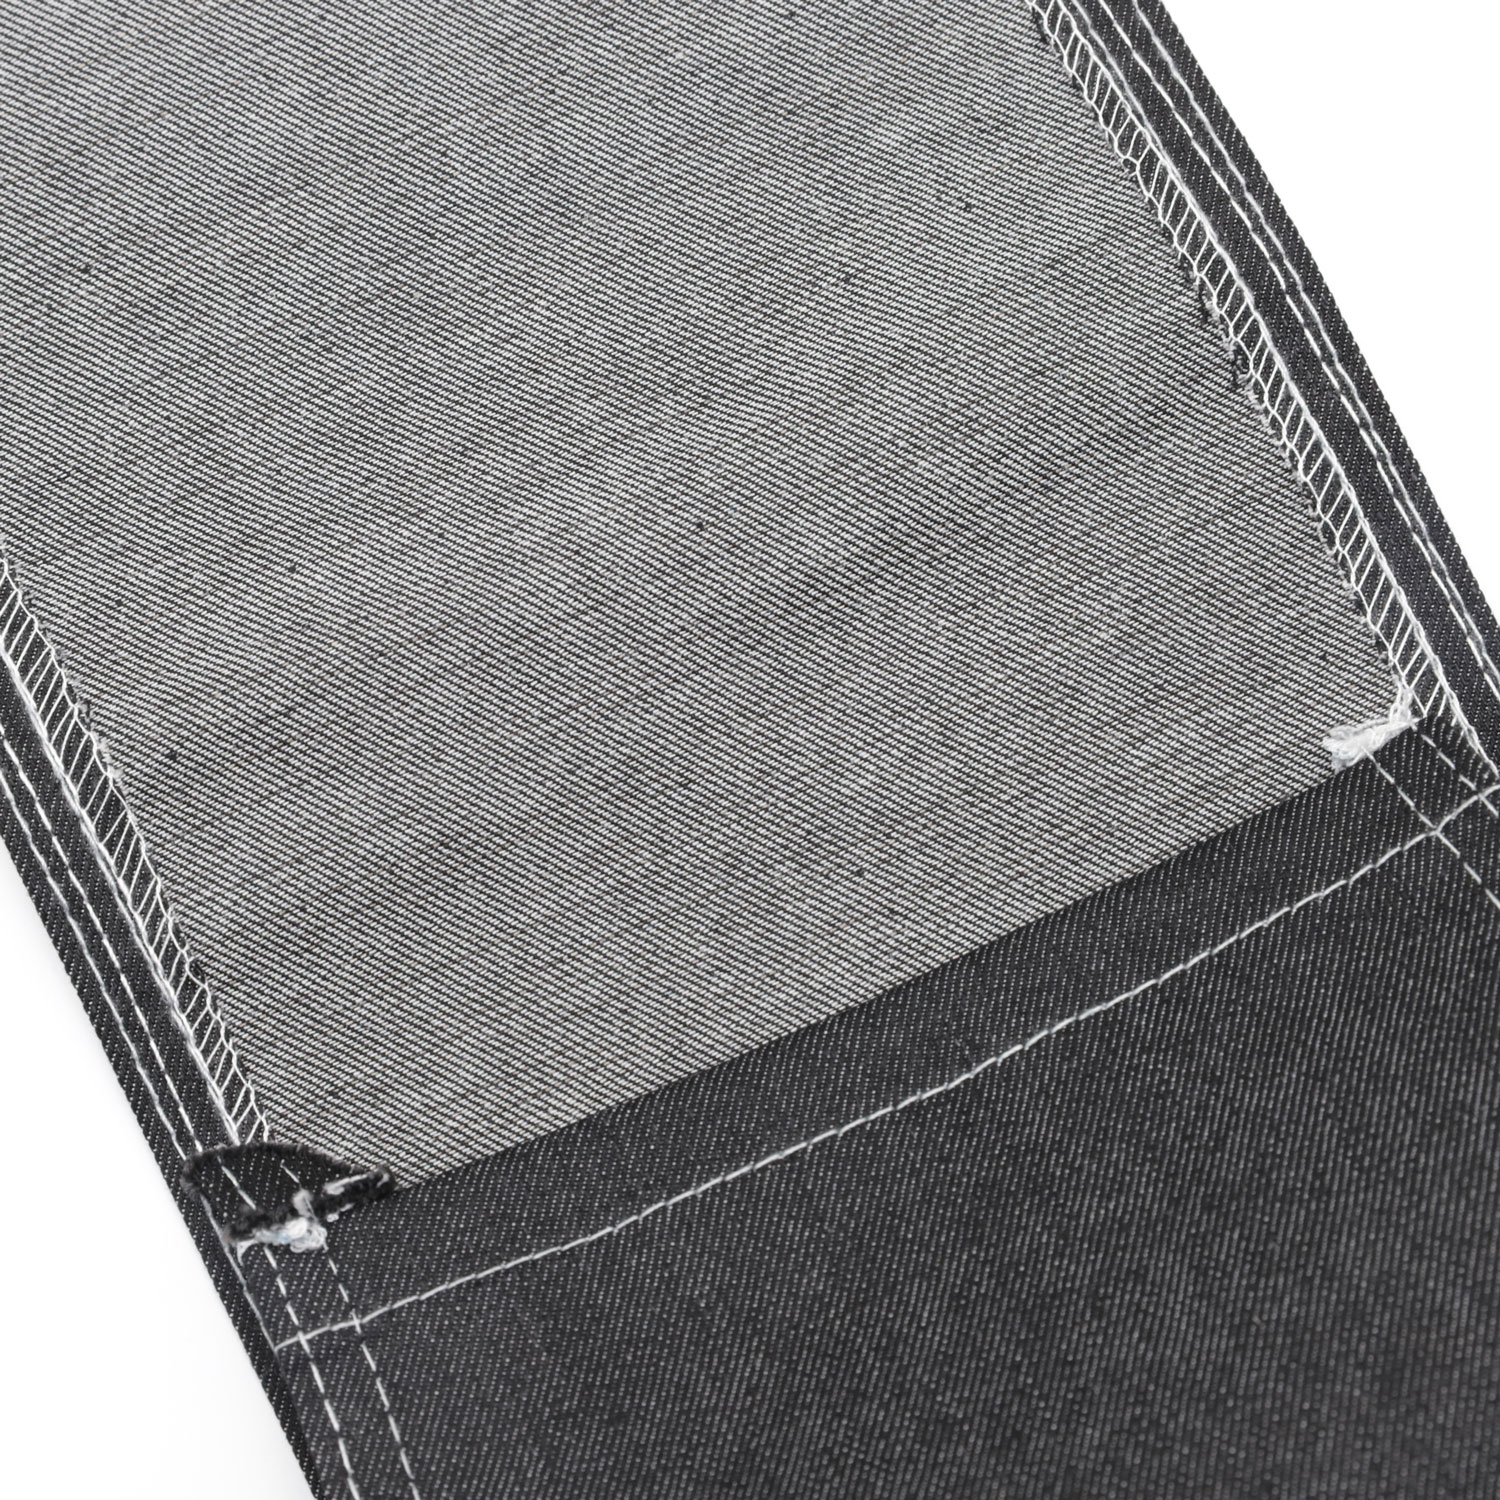 Good High Stretch Denim Fabric: Tips for Buying Good High Stretch Denim Fabric 2